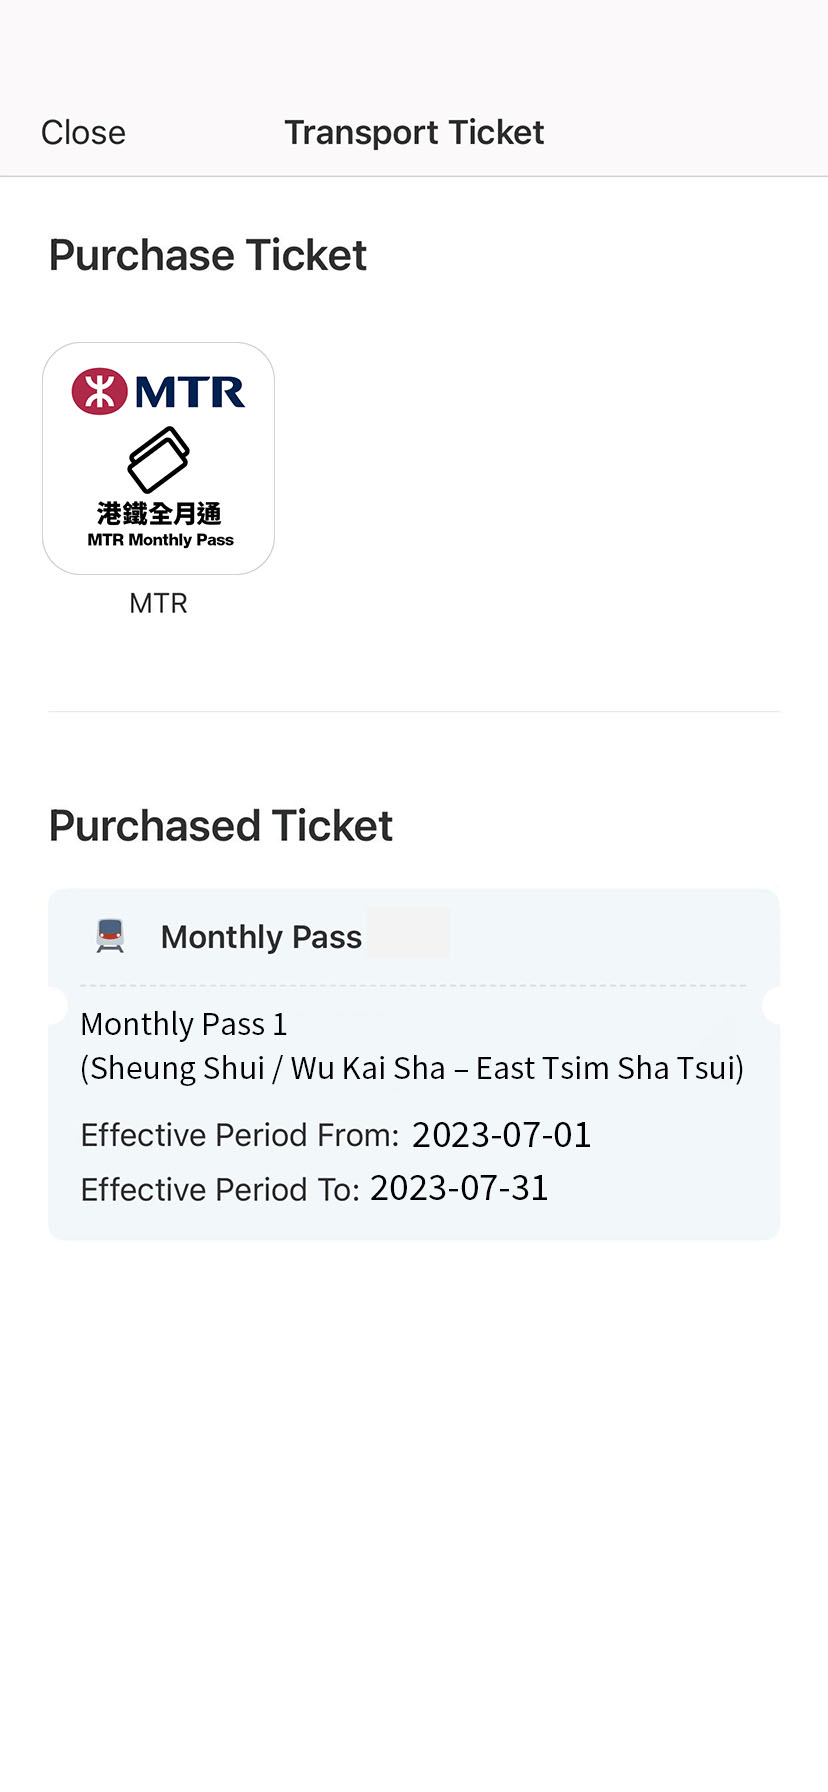 Monthly Pass details will be displayed